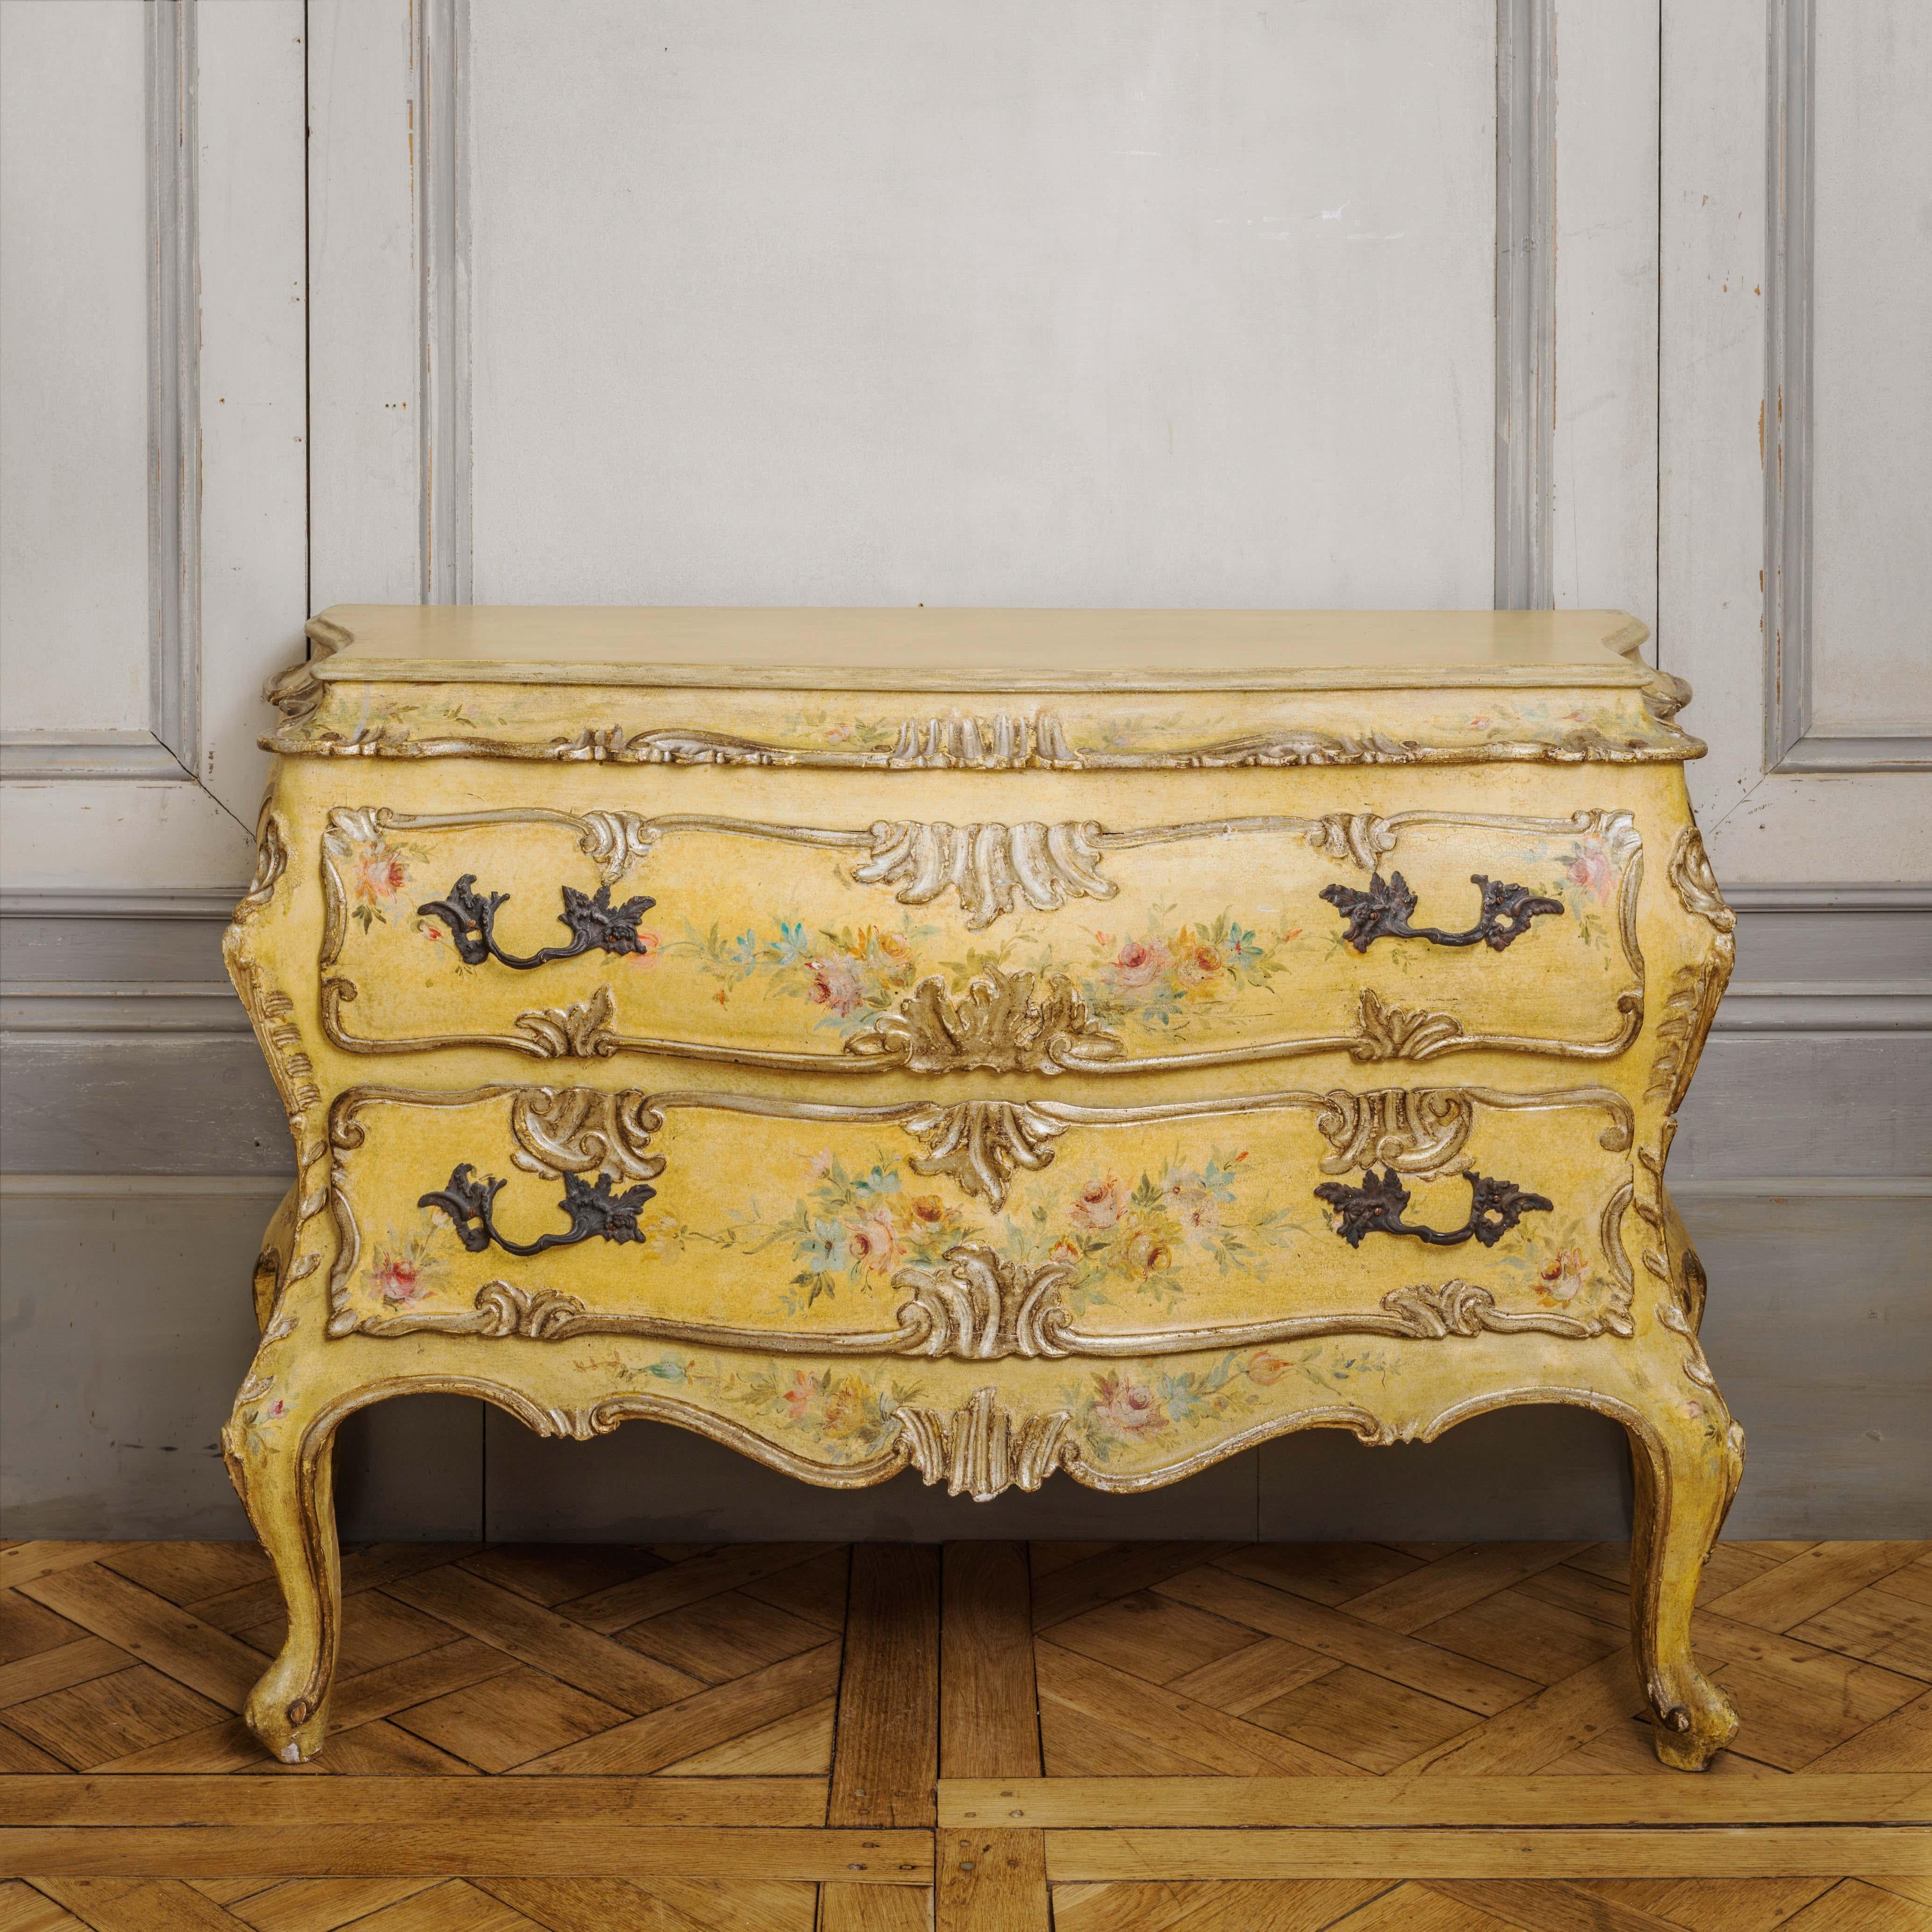 An early 20th century Italian chest of drawers, bombe shape and hand-painted depicting floral motifs in the Venetian style on a sunny yellow background with gilded highlights.